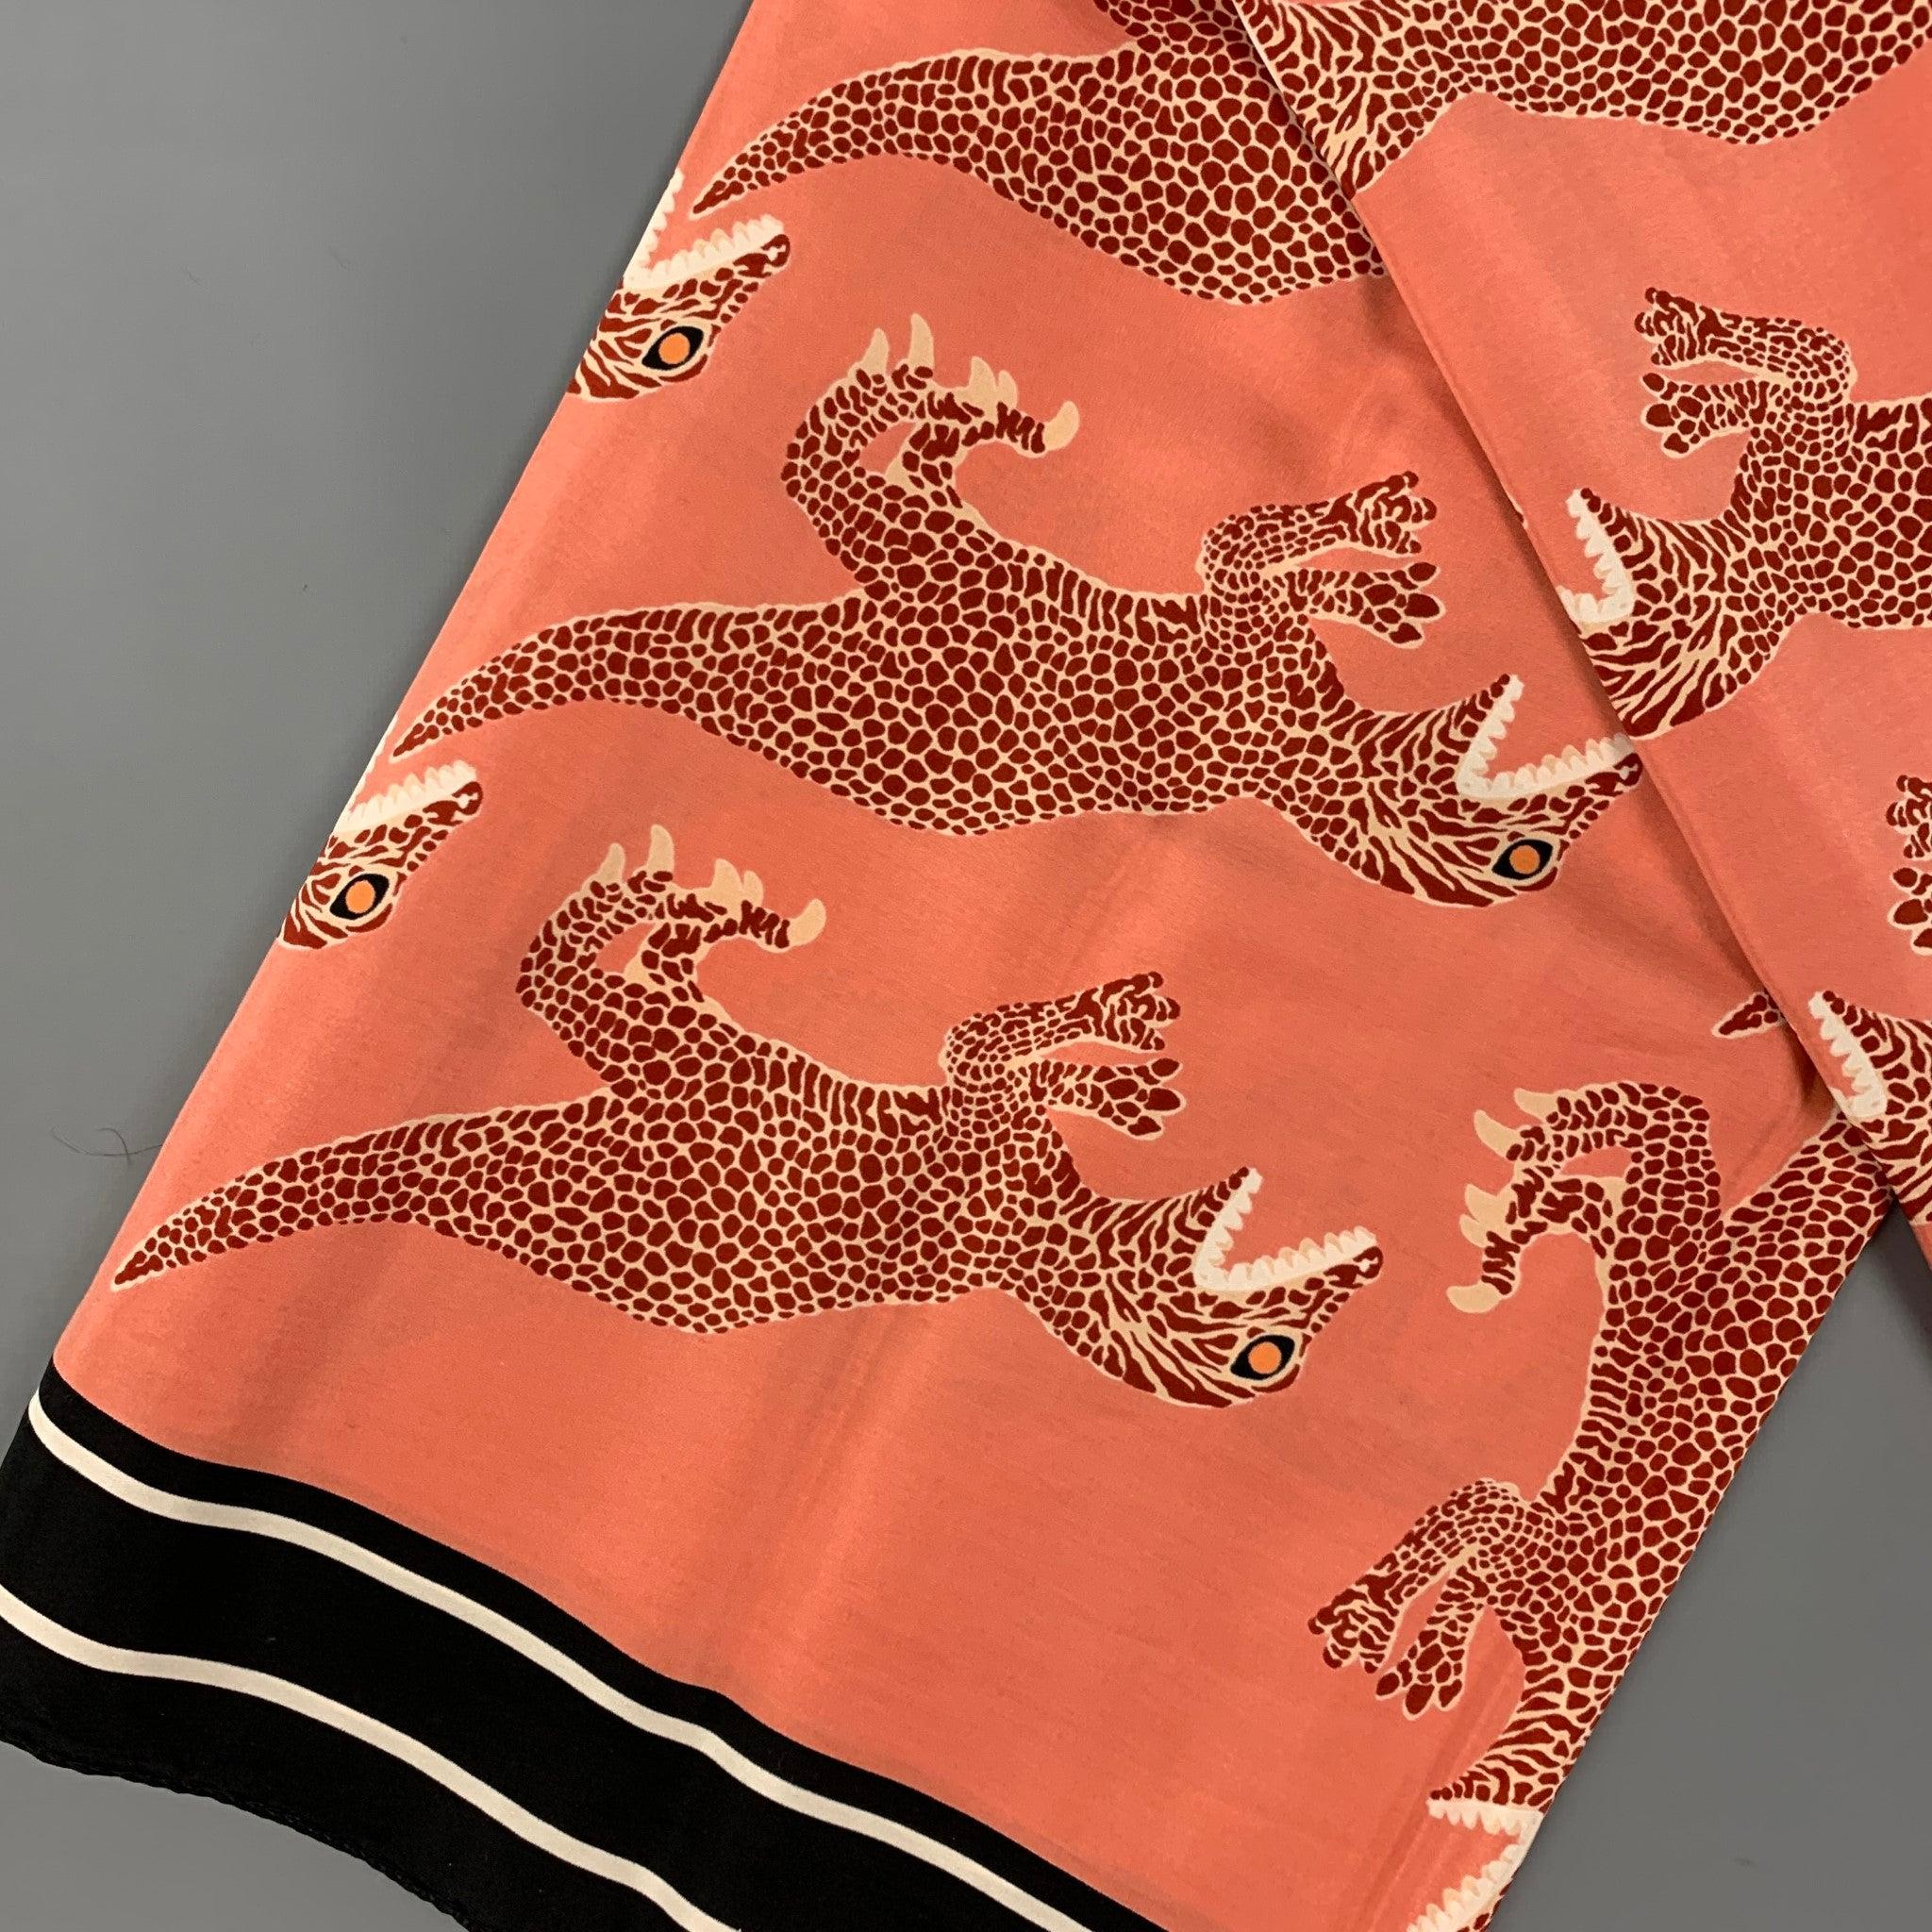 PAUL SMITH scarf comes in a brick & black dinosaur print silk. Made in Italy.
Very Good
Pre-Owned Condition. 

Measurements: 
  46.5 inches  x 46 inches 
  
  
 
Reference: 119790
Category: Scarves
More Details
    
Brand:  PAUL SMITH
Color: 